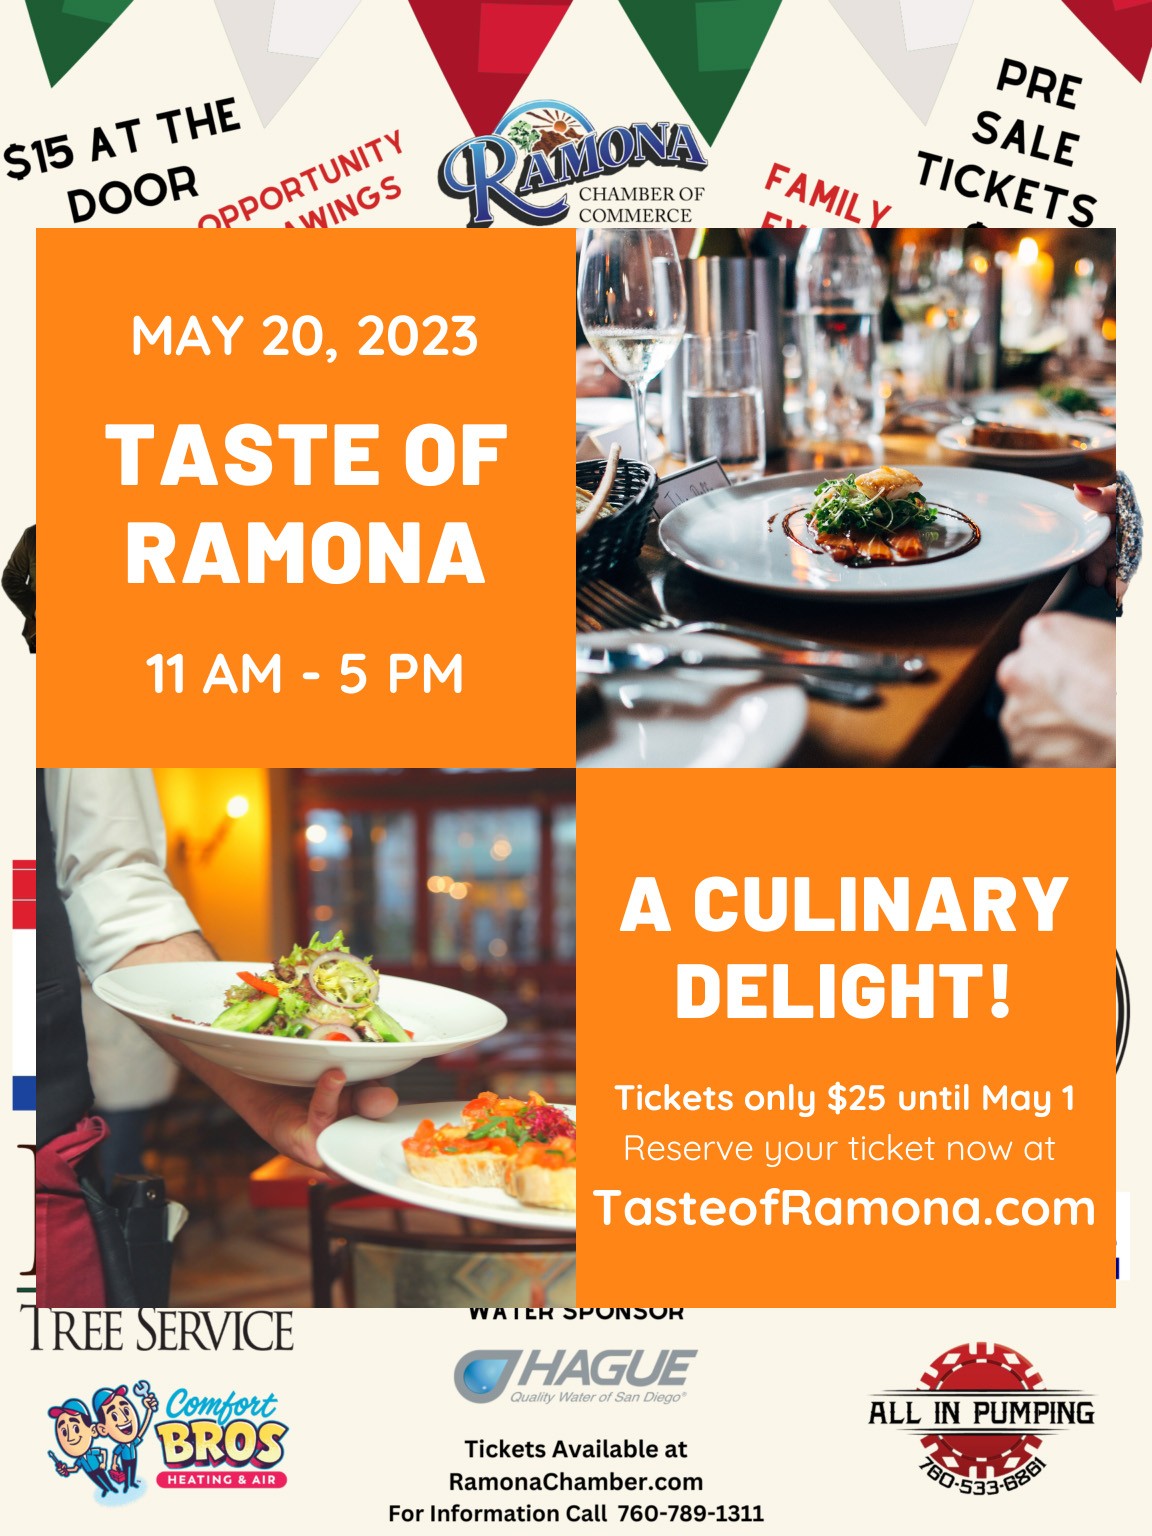 Join Ramona Chamber of Commerce for the 9th Annual TASTE OF RAMONA